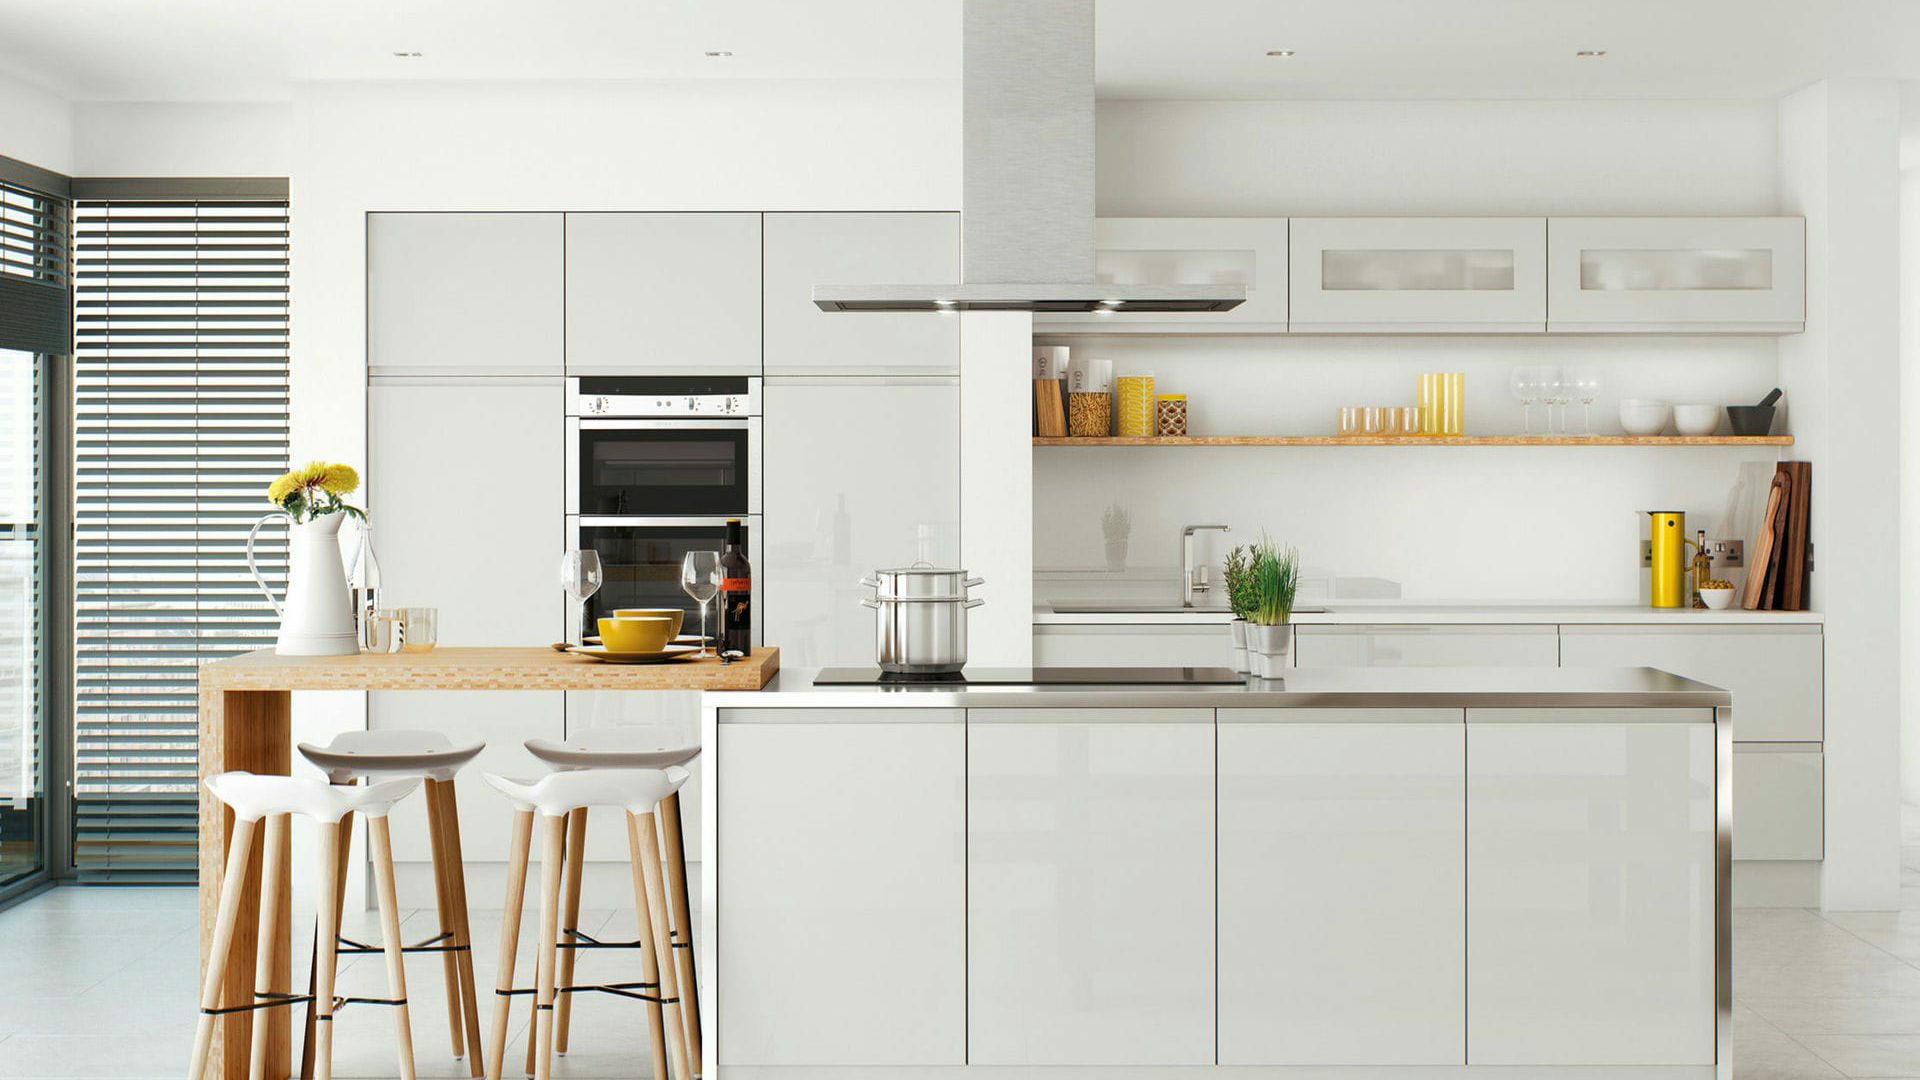 Handleless matt light grey kitchens for a subtle and sophisticated style in a modern space